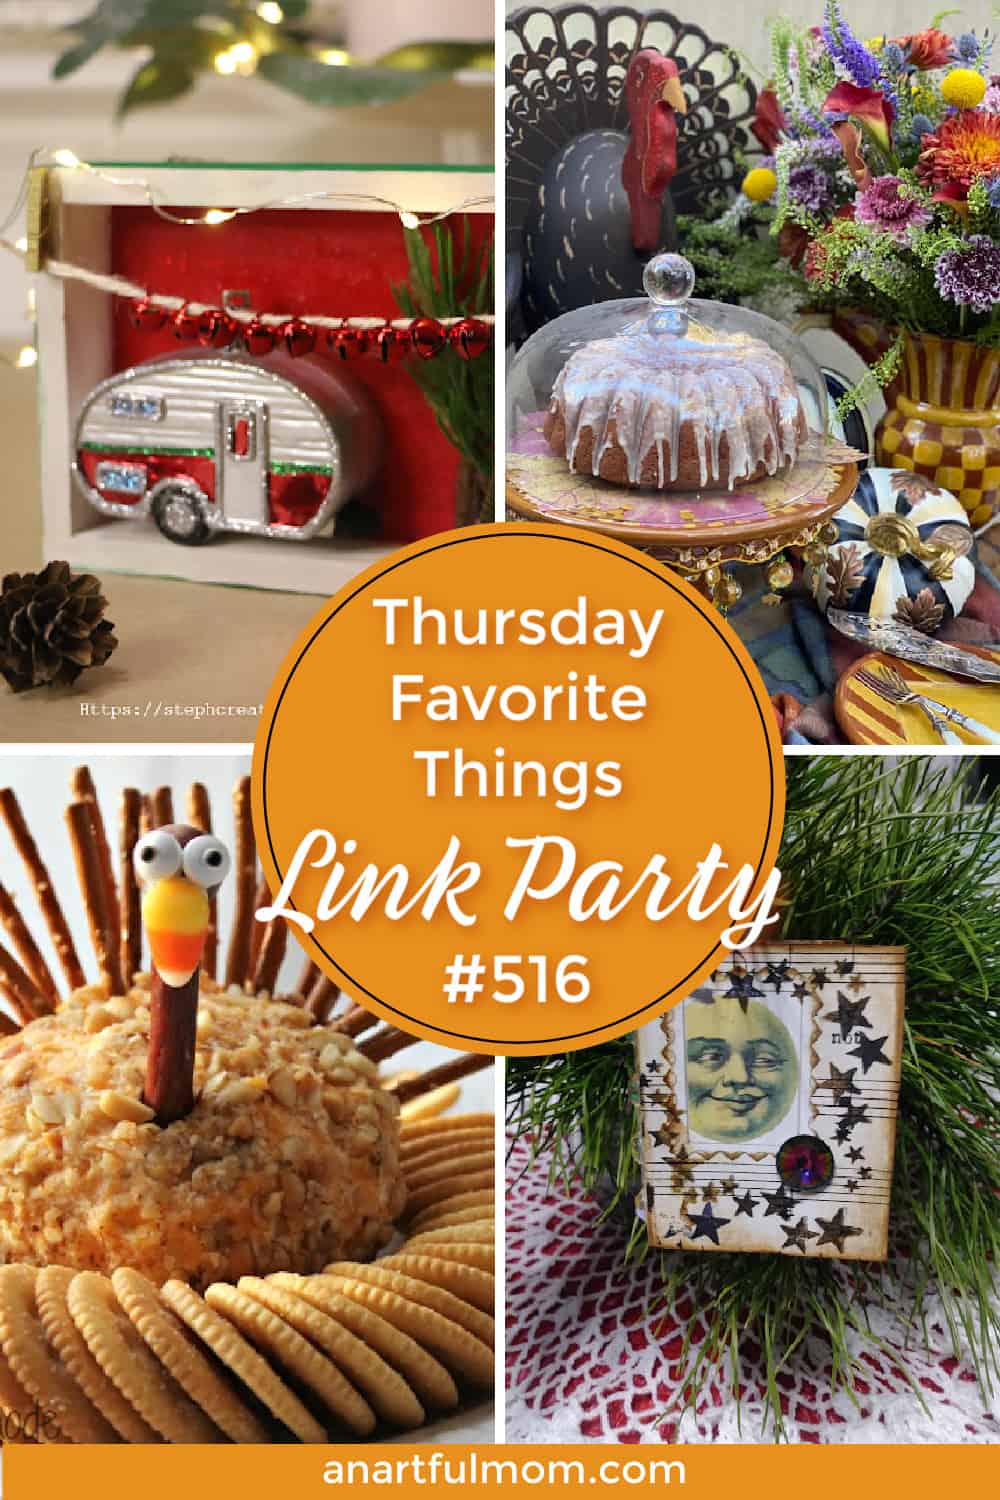 Thursday Favorite Things (TFT) Link Party #516